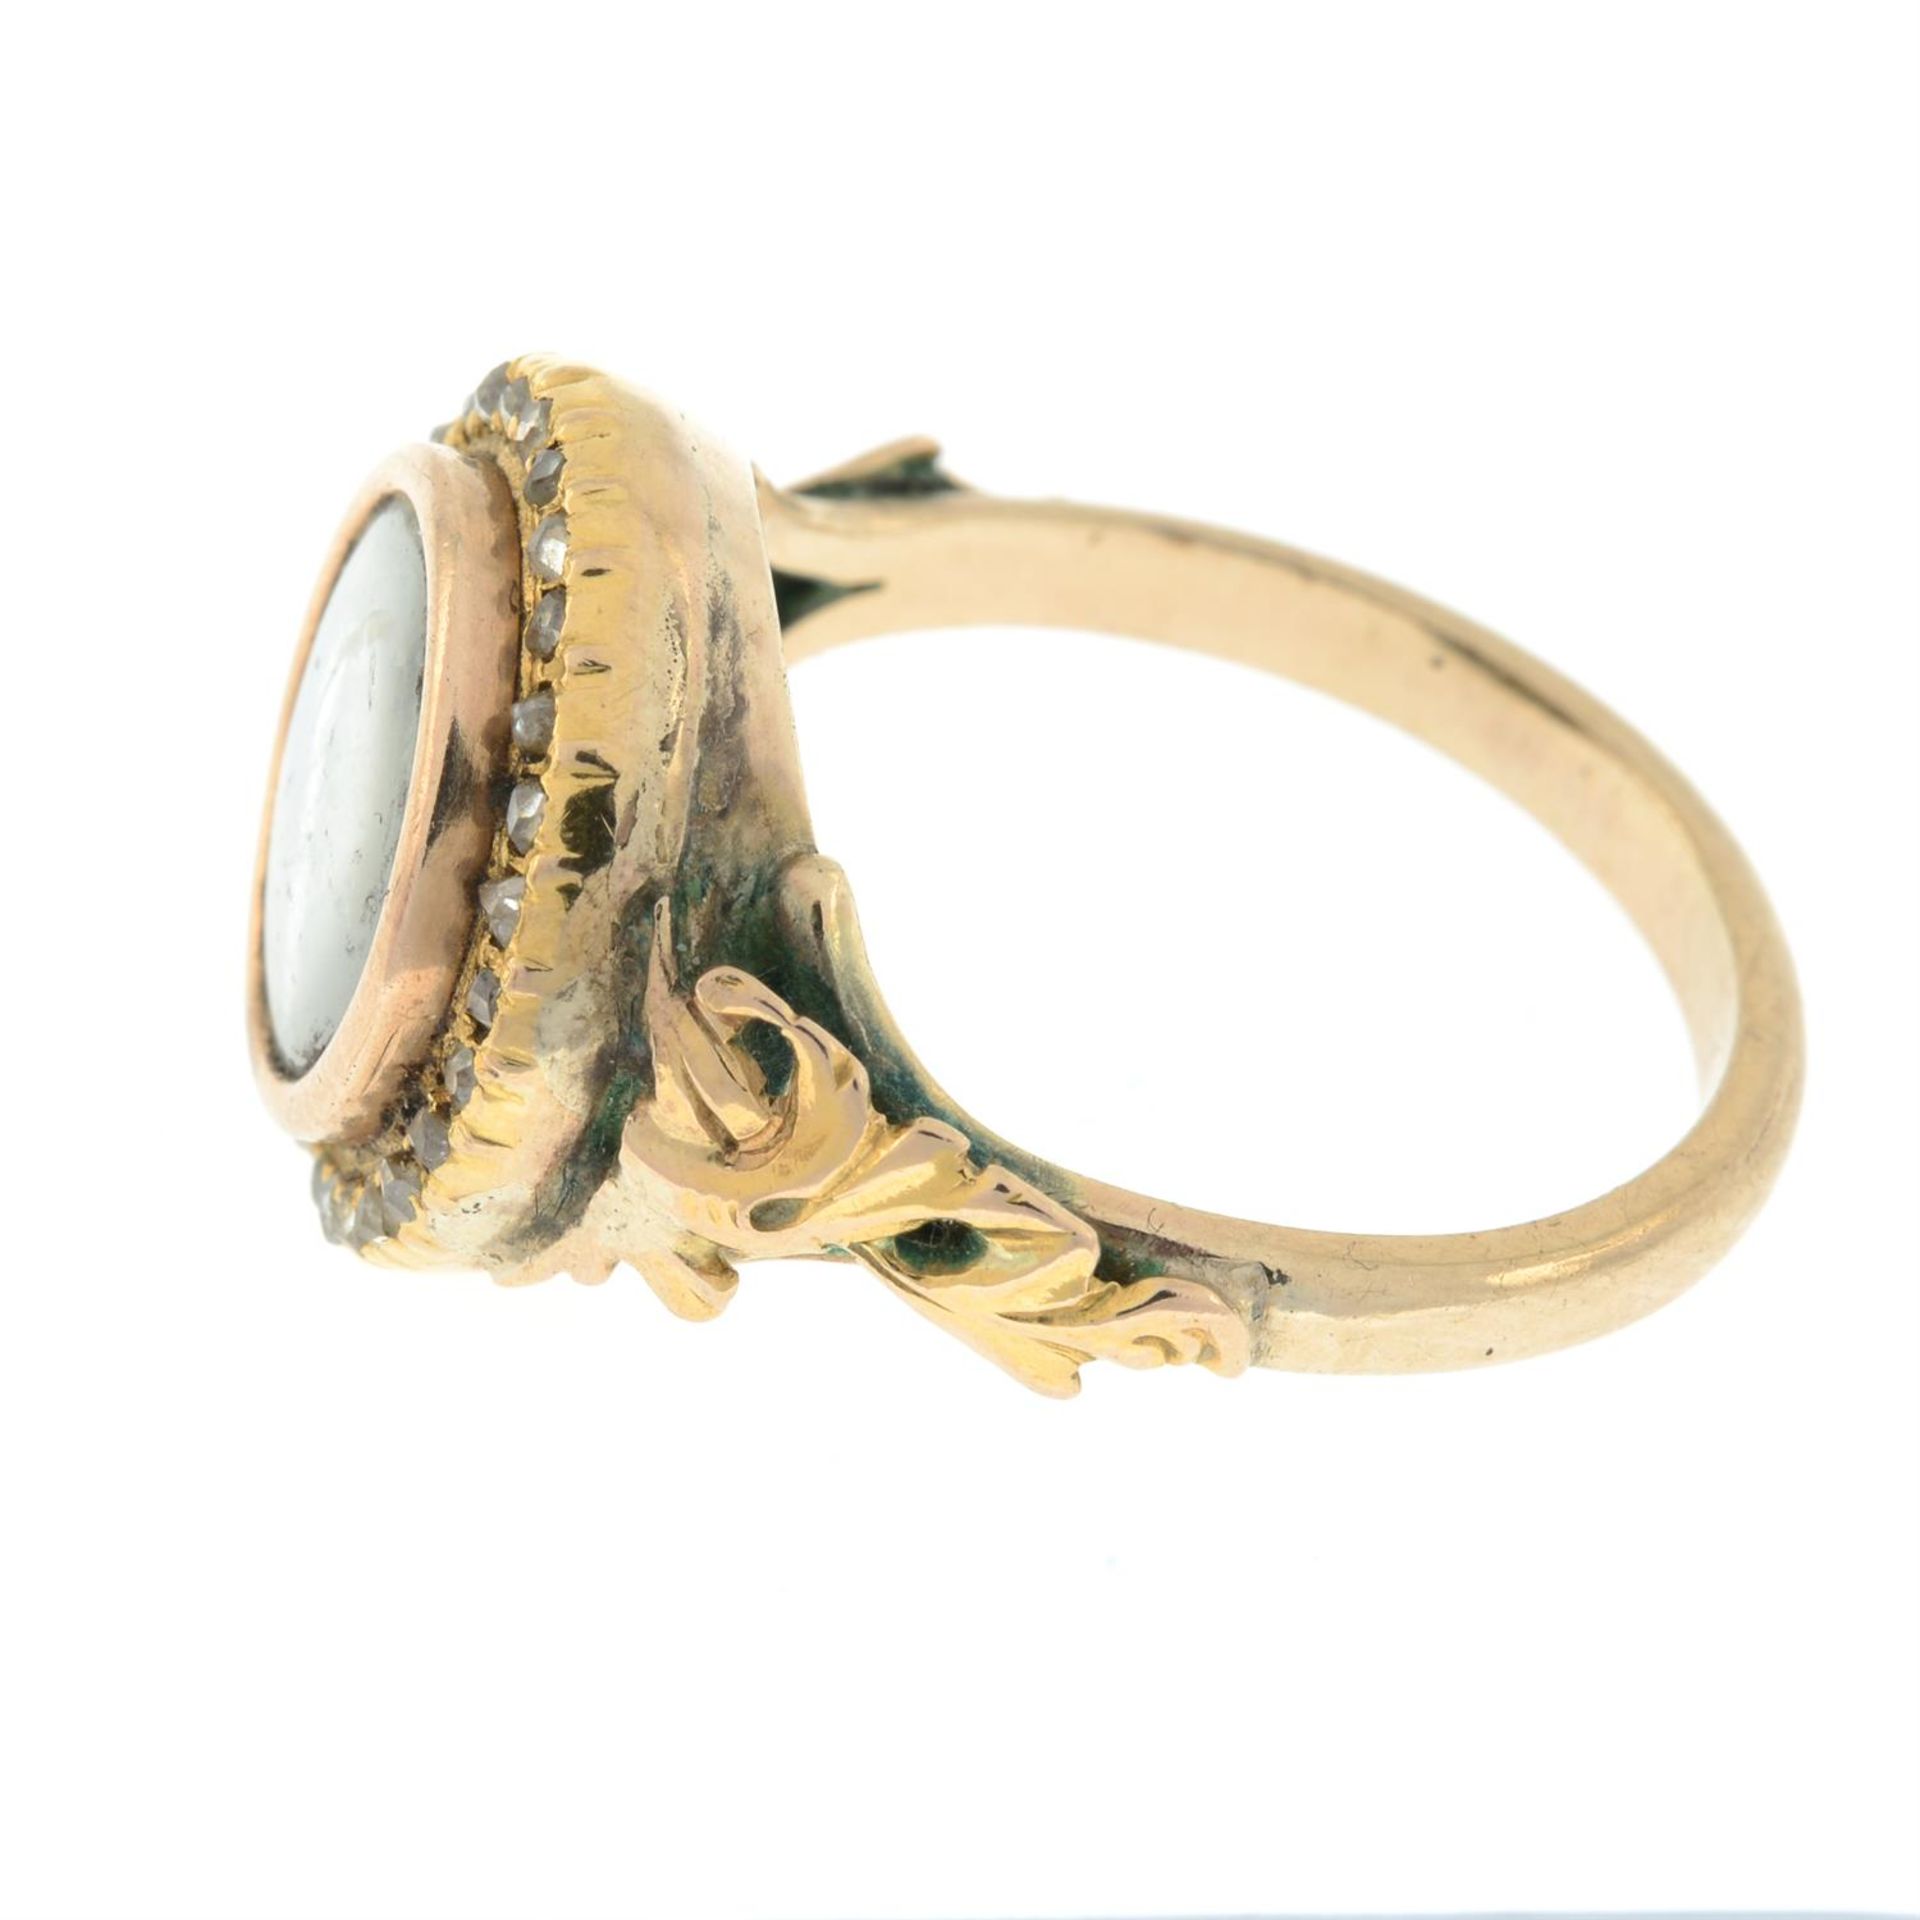 A late 19th century gold portrait miniature ring, with rose-cut diamond surround and replacement - Image 4 of 5